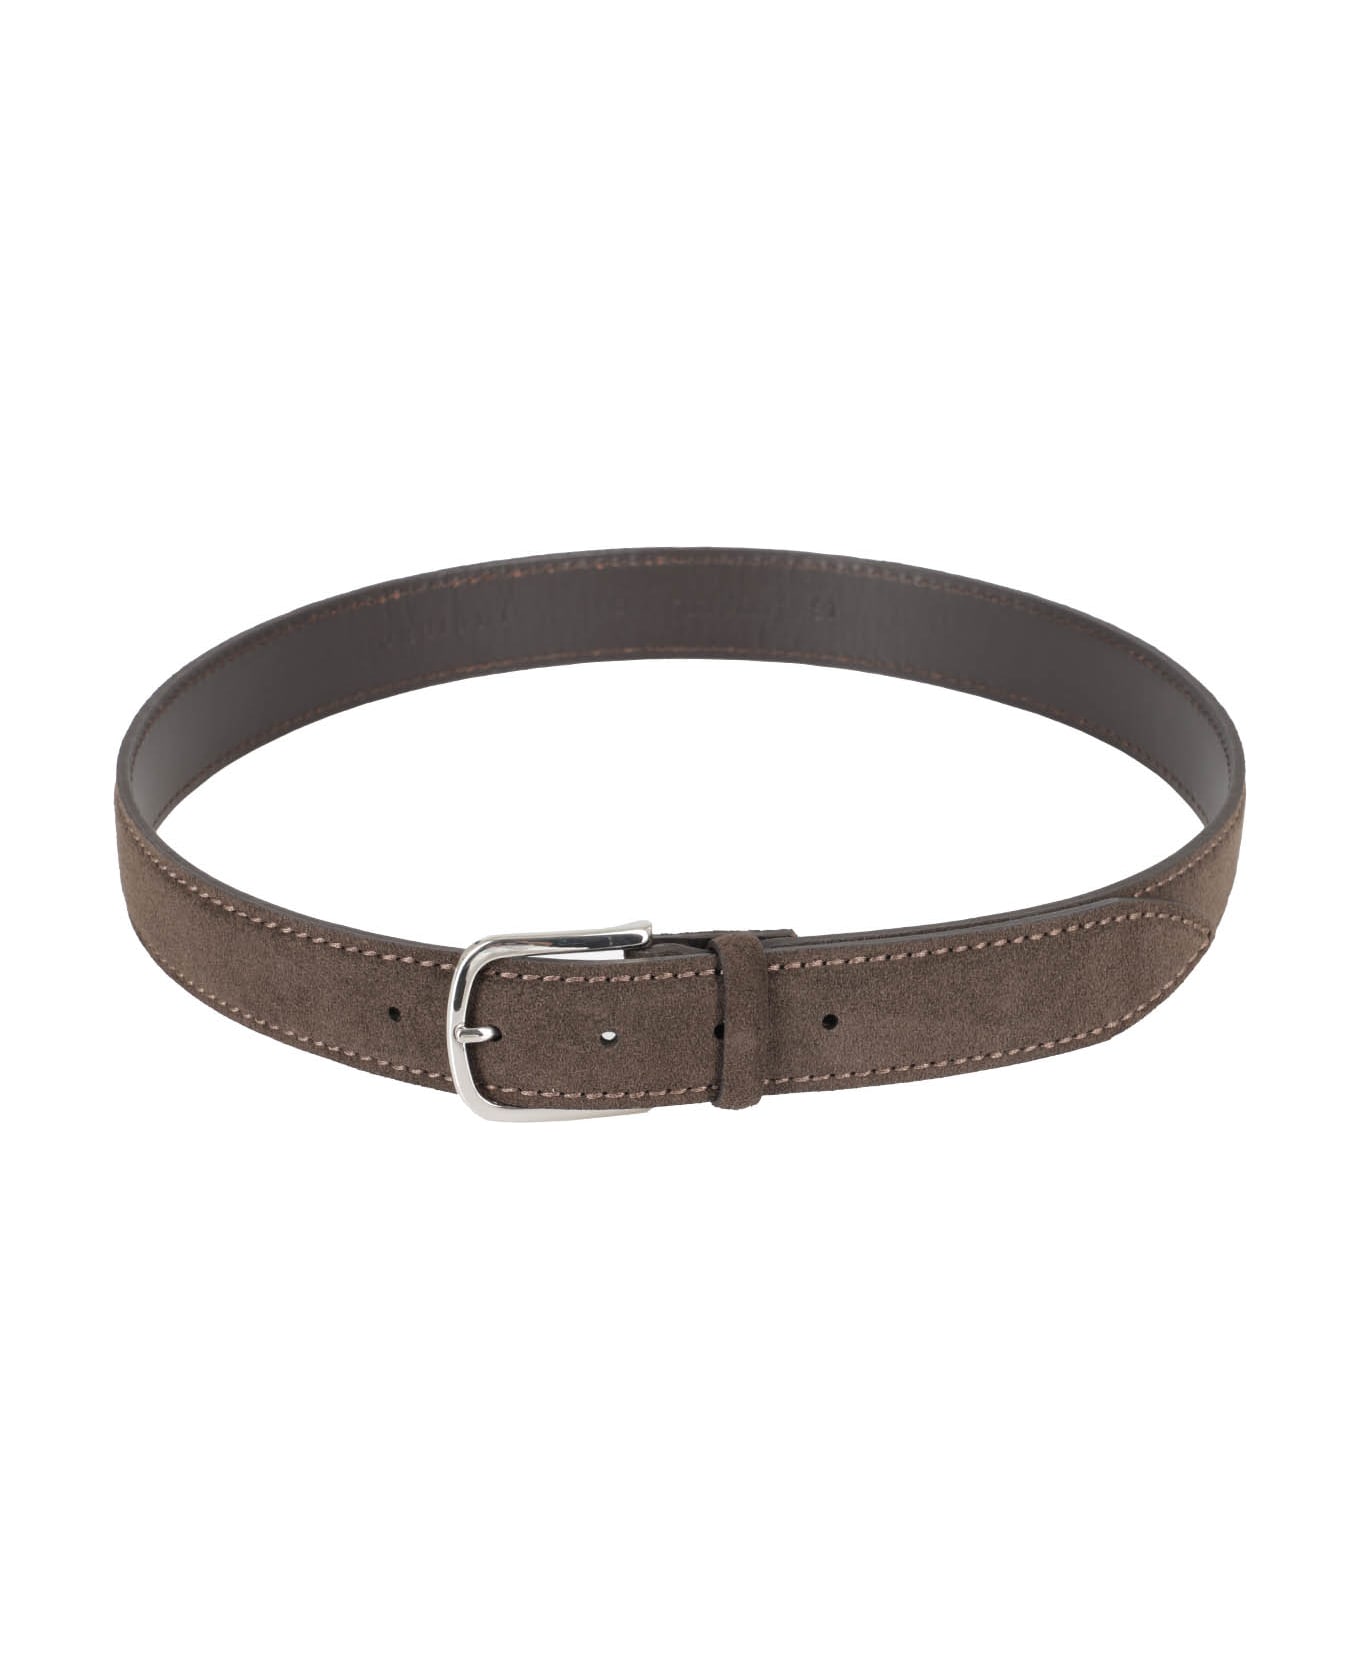 Orciani Suede Belt - T Moro